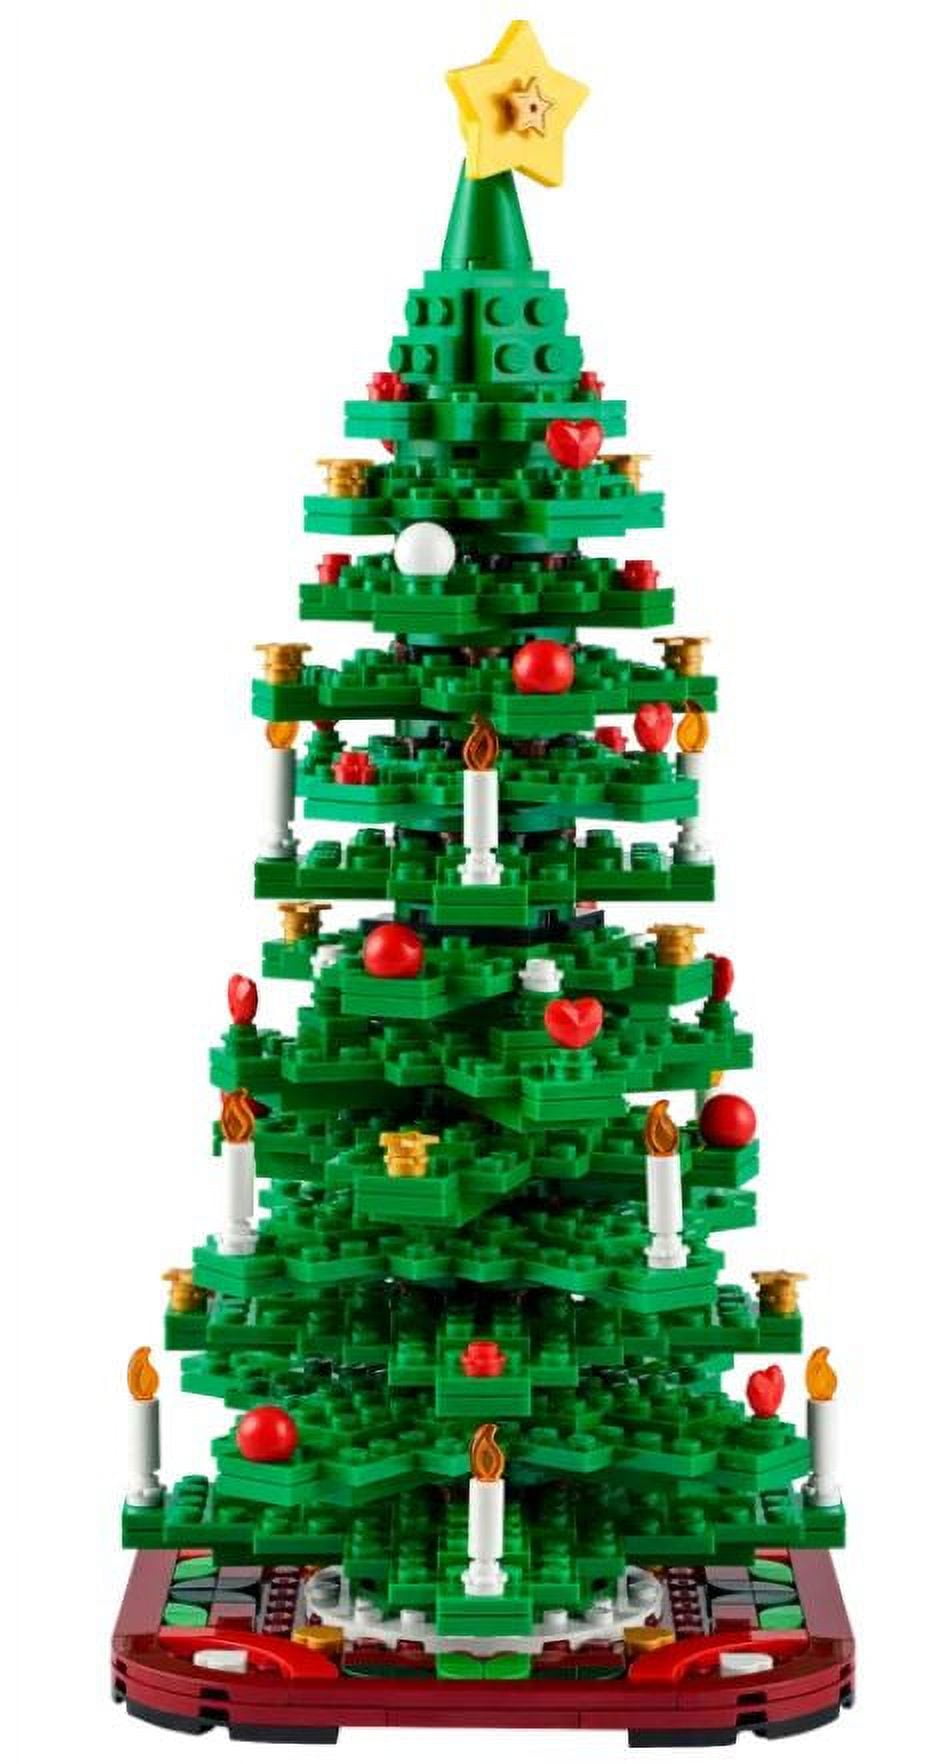 Review: 40573-1 - Christmas Tree